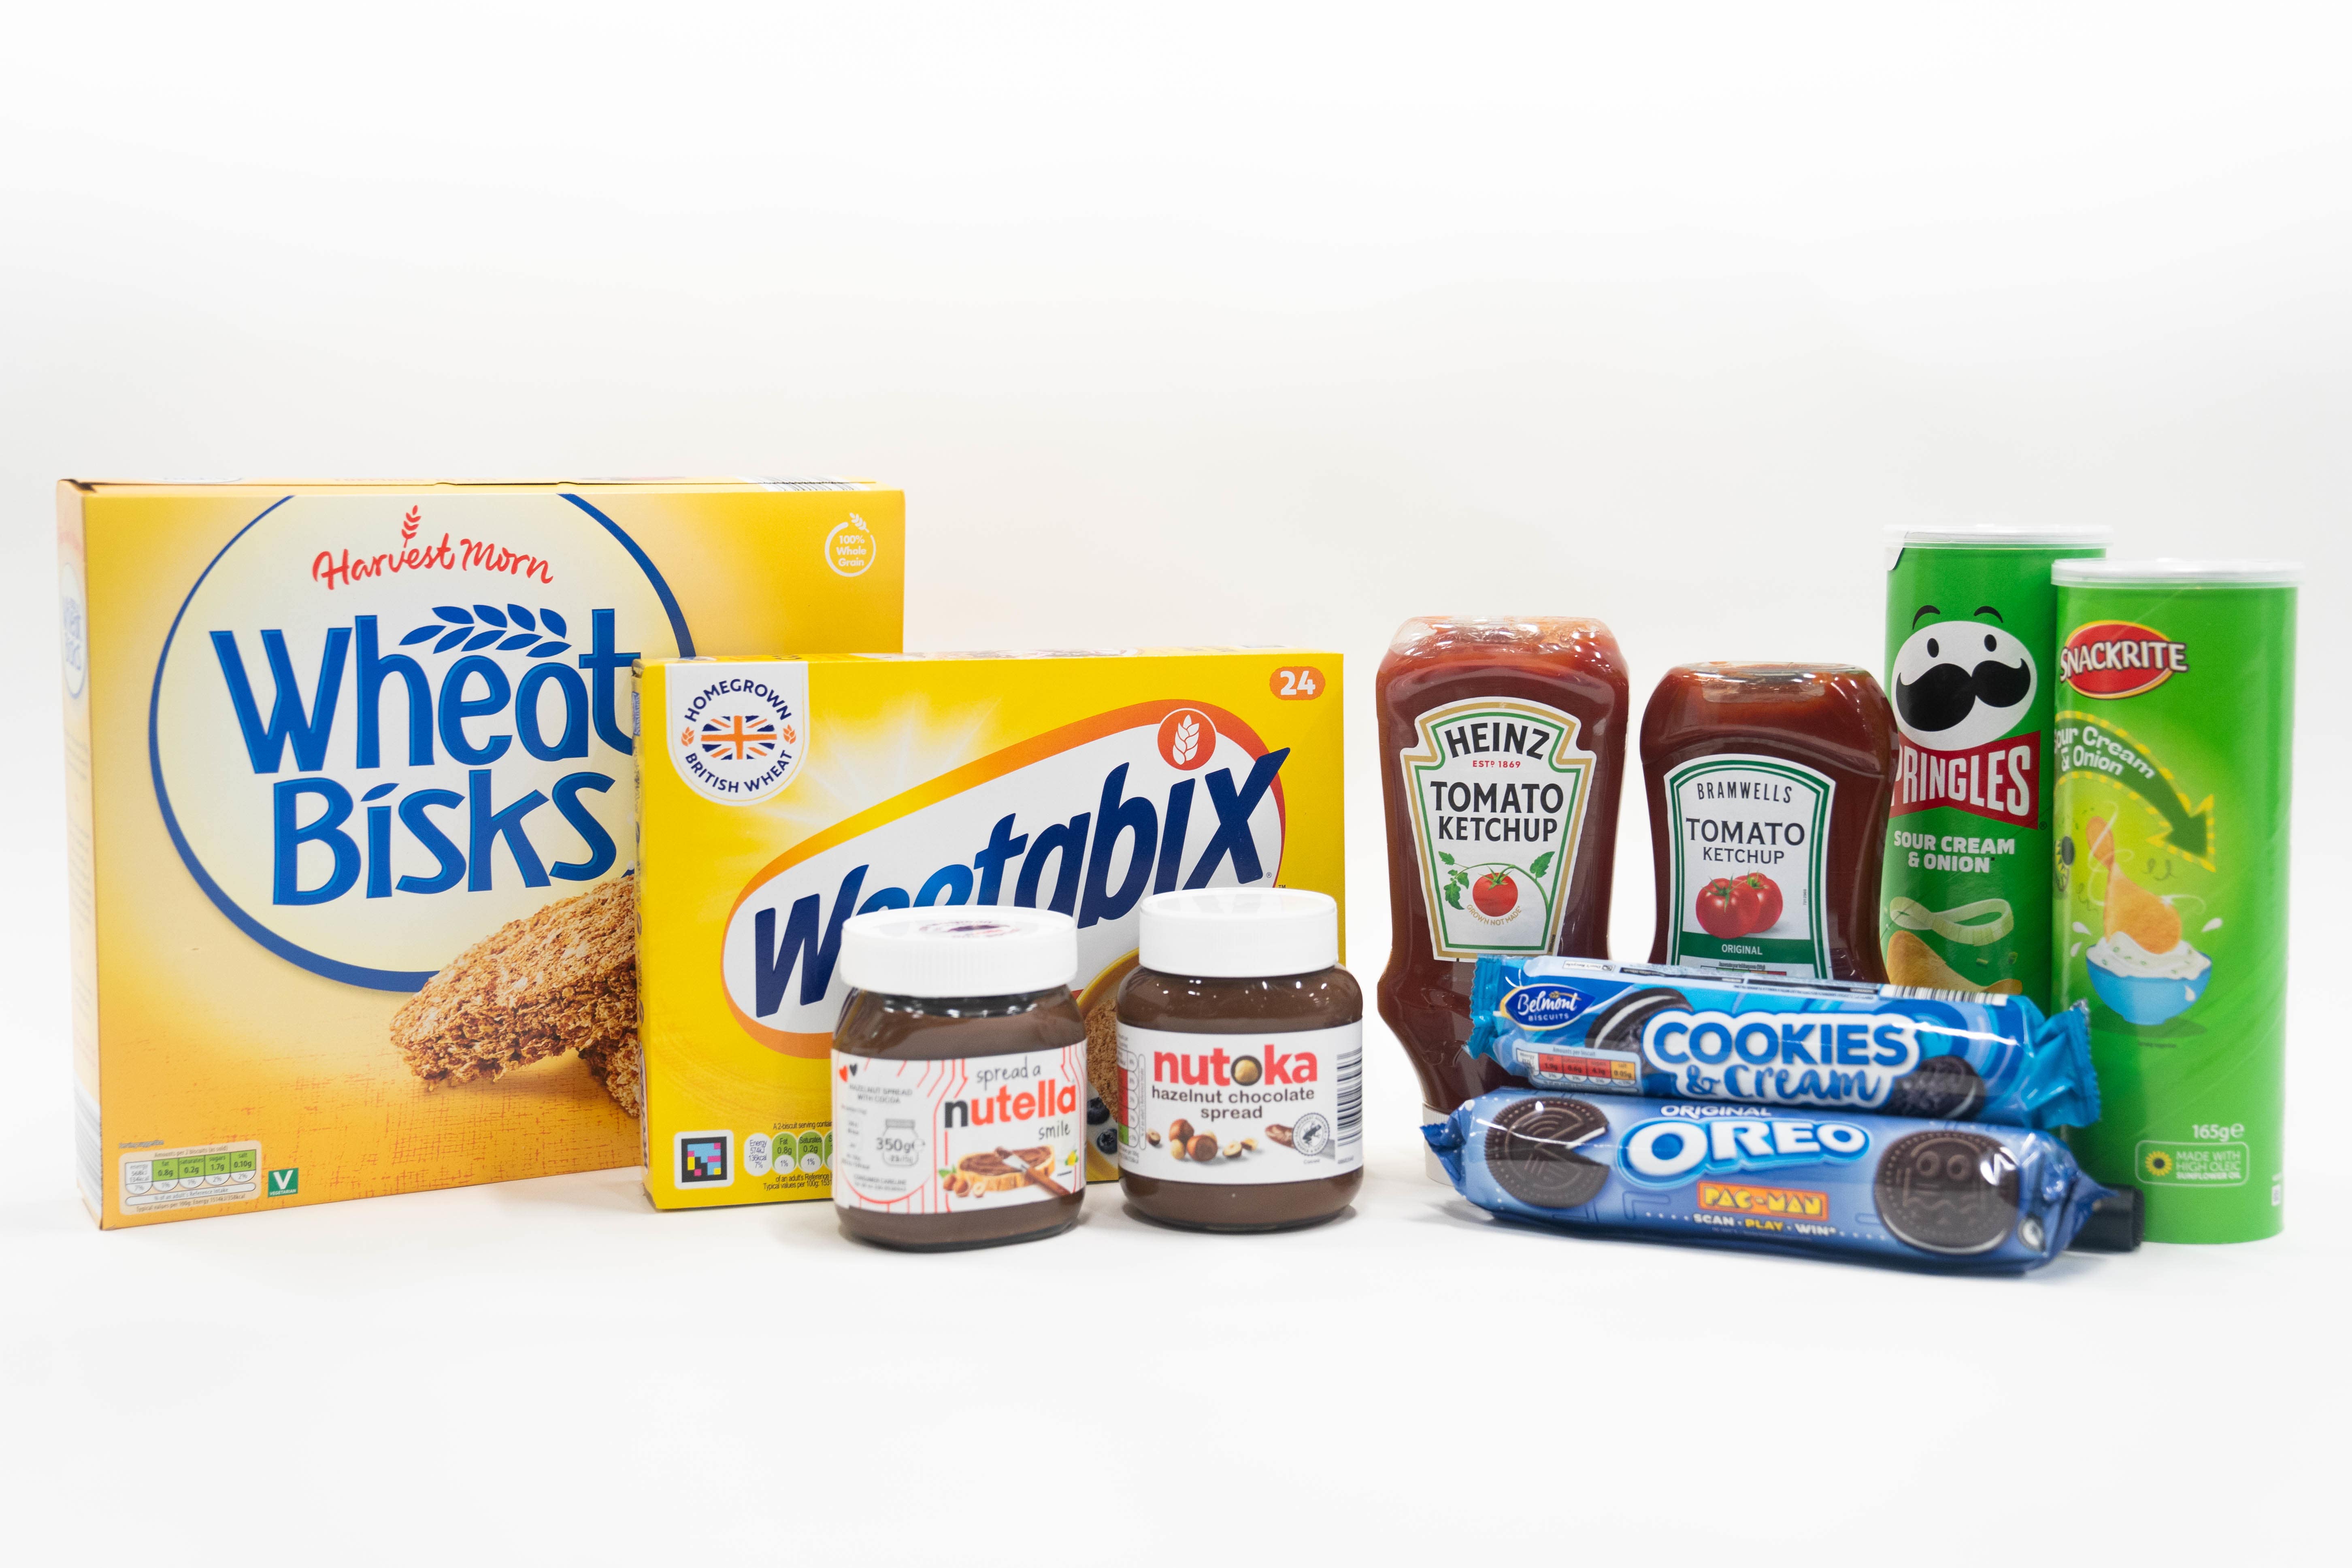 Just some of the Aldi brands and the original products